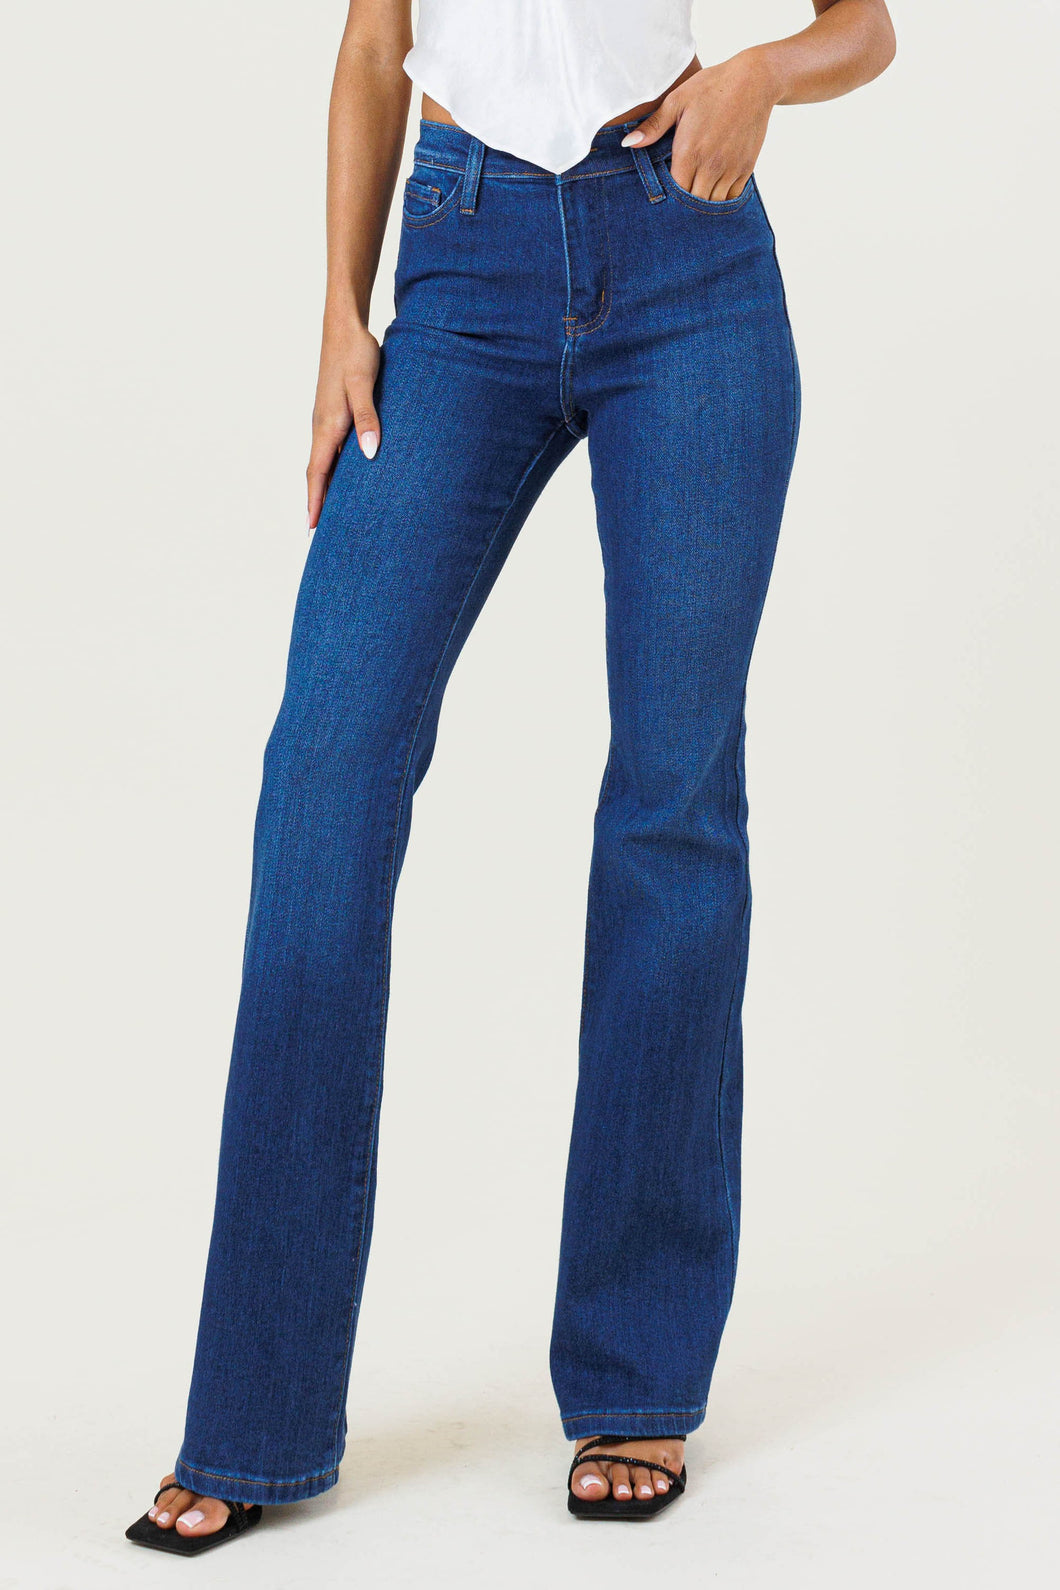 Back To Classic High Waisted Jeans